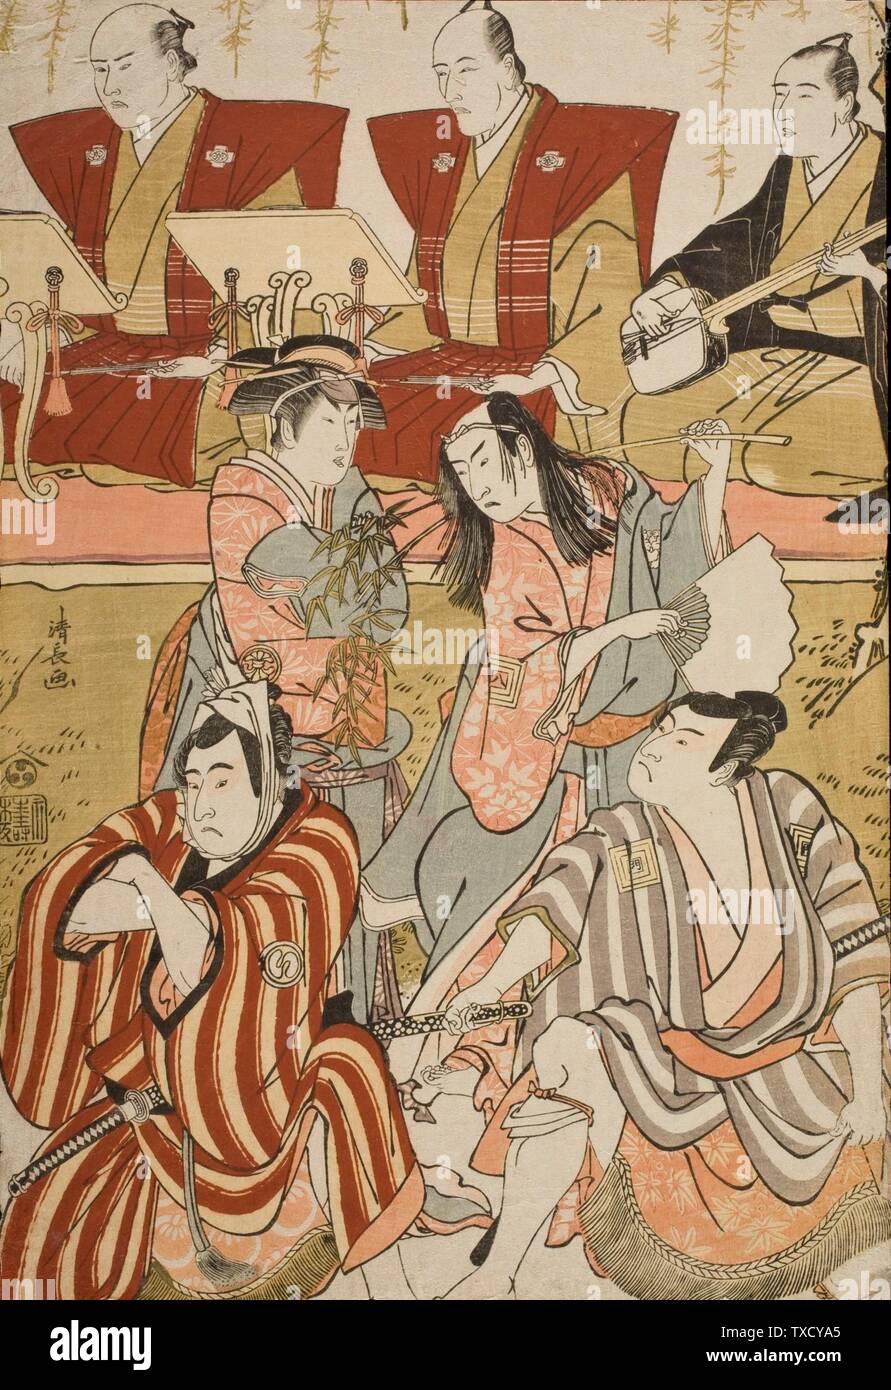 Scene froma Kabuki play;  mid-late 1780s Prints; woodcuts Color woodbk print Image and Sheet: 14 x 9 5/8 in. (35.56 x 24.45 cm) The Joan Elizabeth Tanney Bequest (M.2006.136.305) Japanese Art; Mid-late 1780s; Stock Photo